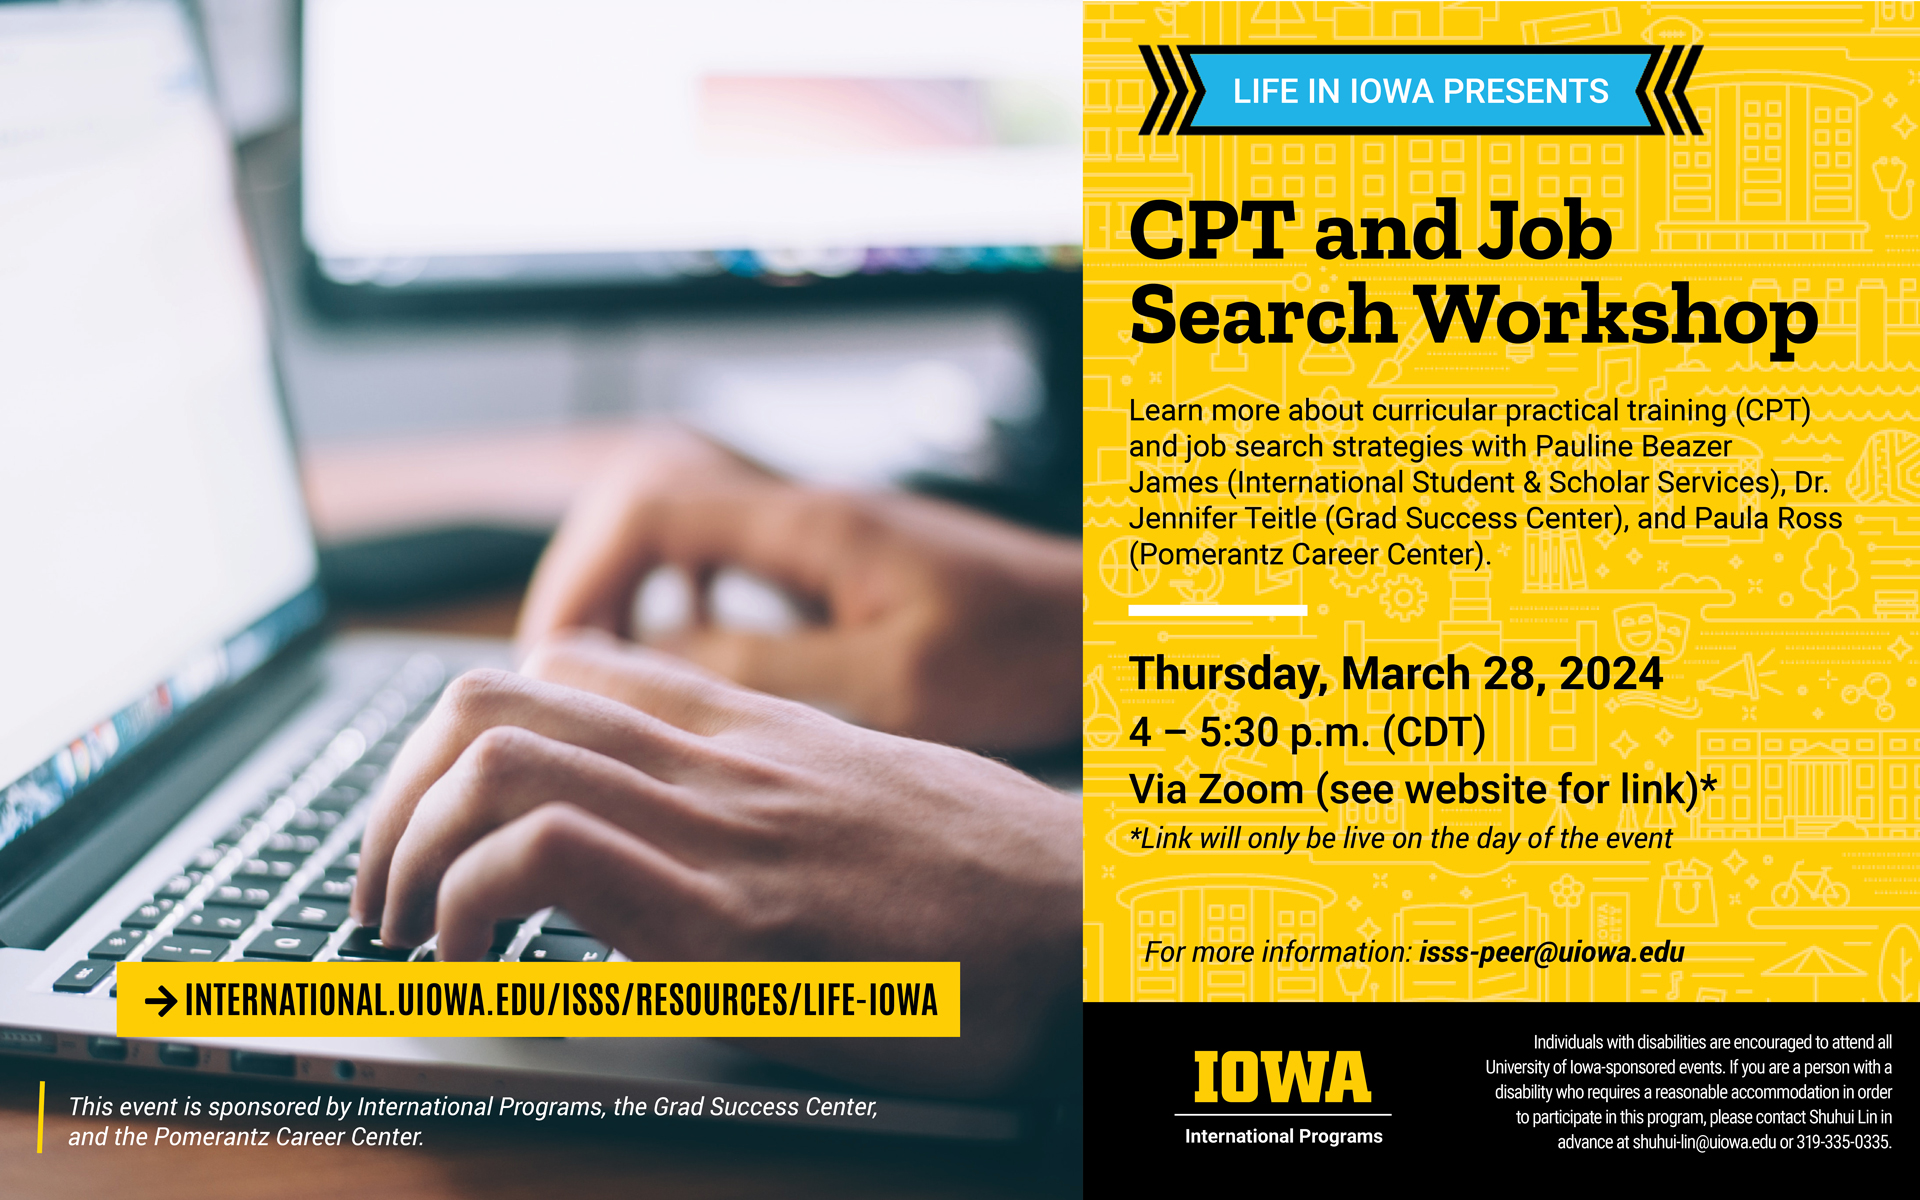 CPT and Job Search Workshop: March 28, 4-5:30 p.m. via Zoom. Learn more: international.uiowa.edu/isss/resources/life-iowa